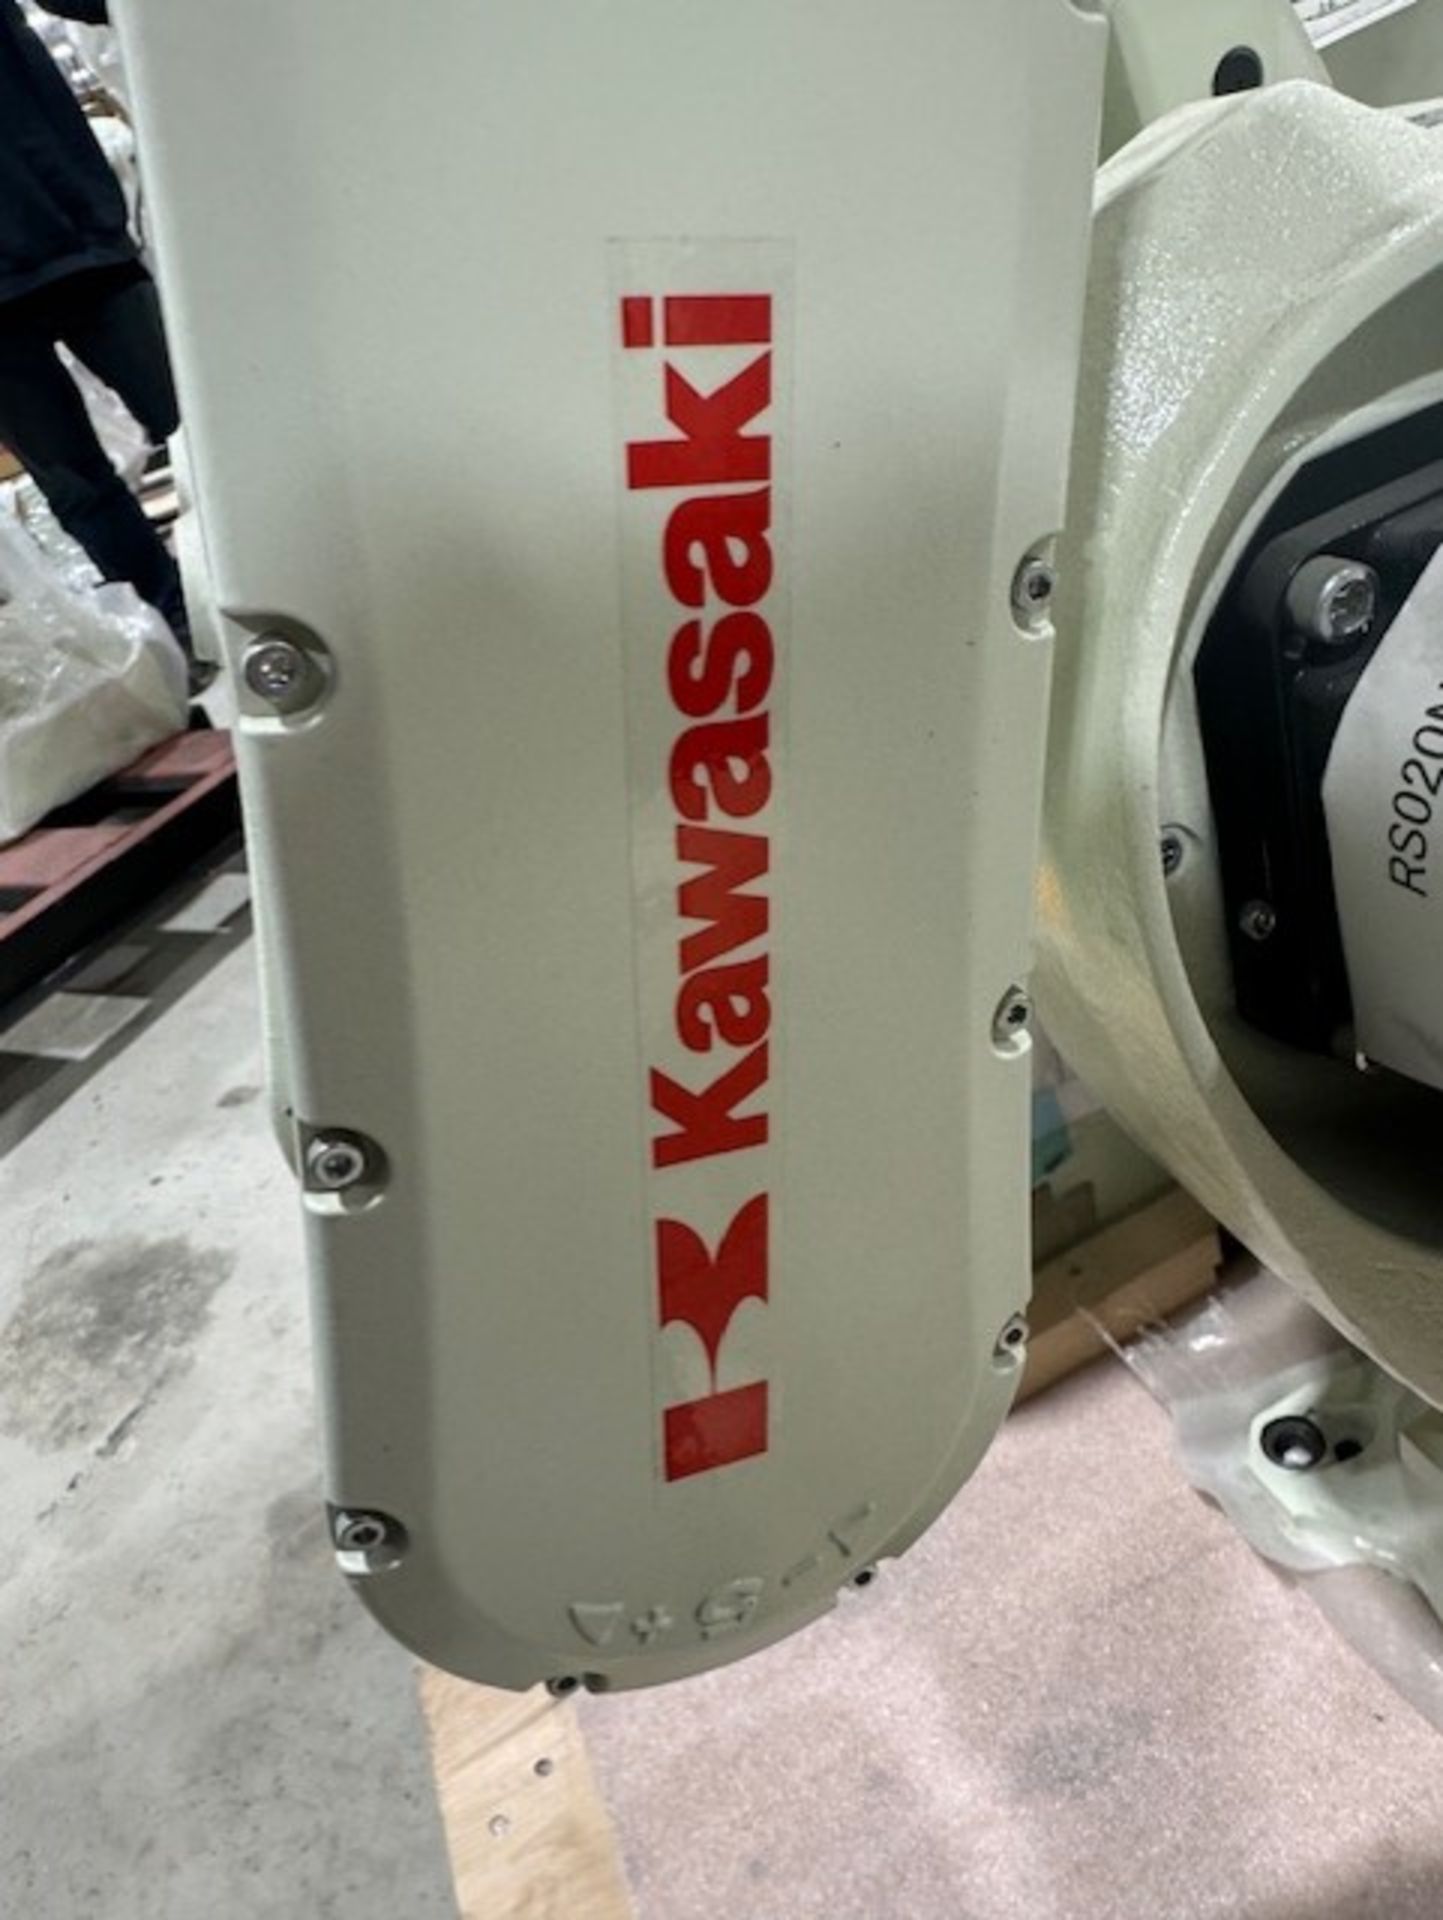 NEW KAWASAKI ROBOT MODEL RS020N, SN 4717, 20KG X 1725MM REACH WITH EO1 CONTROLS, CABLES & TEACH - Image 5 of 7